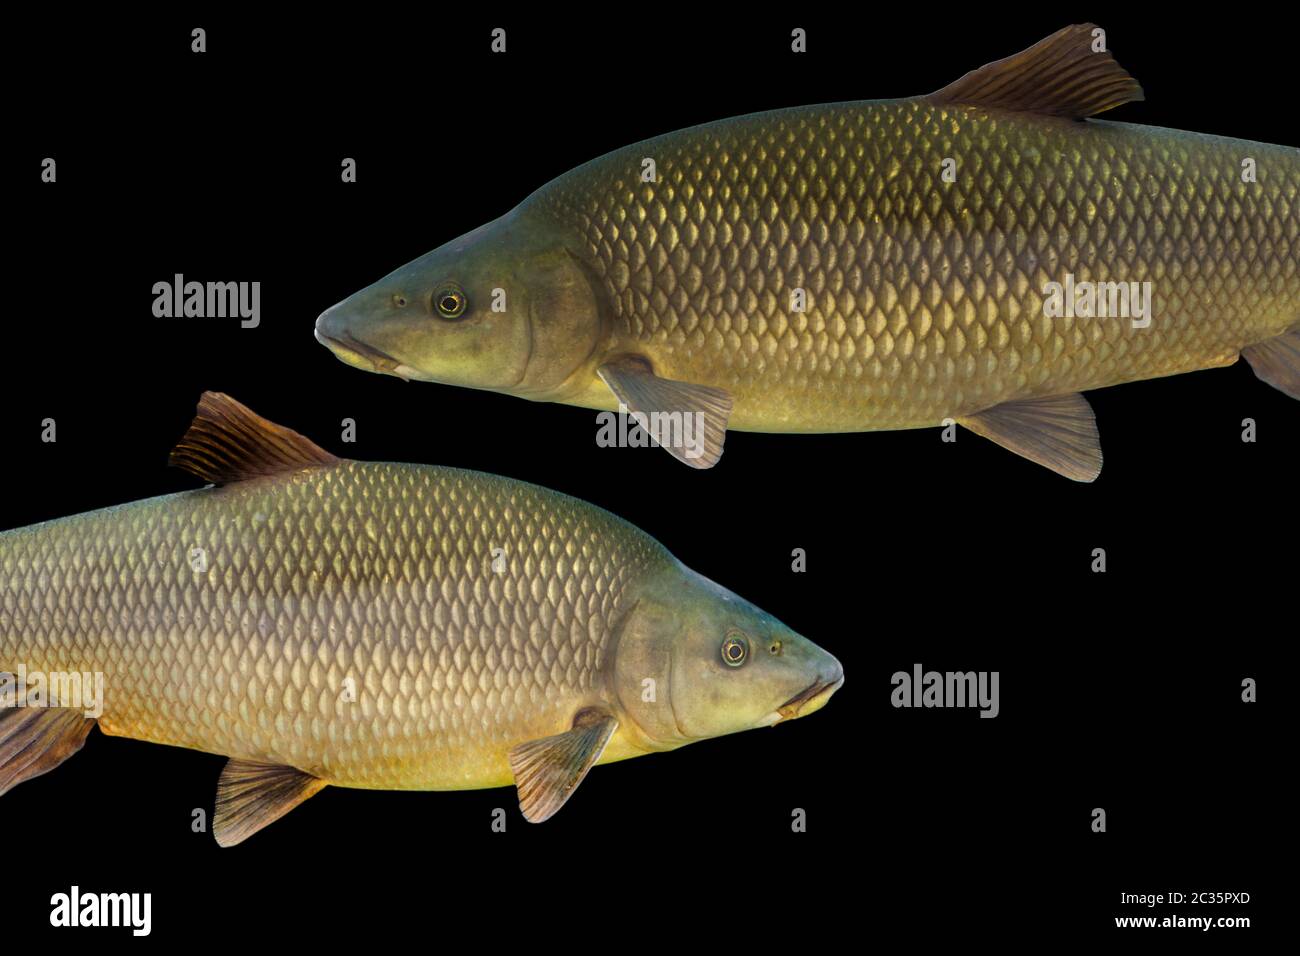 Common barbel, Barbus barbus, is a species of freshwater fish, abundant in Guadiana River, Spain Stock Photo